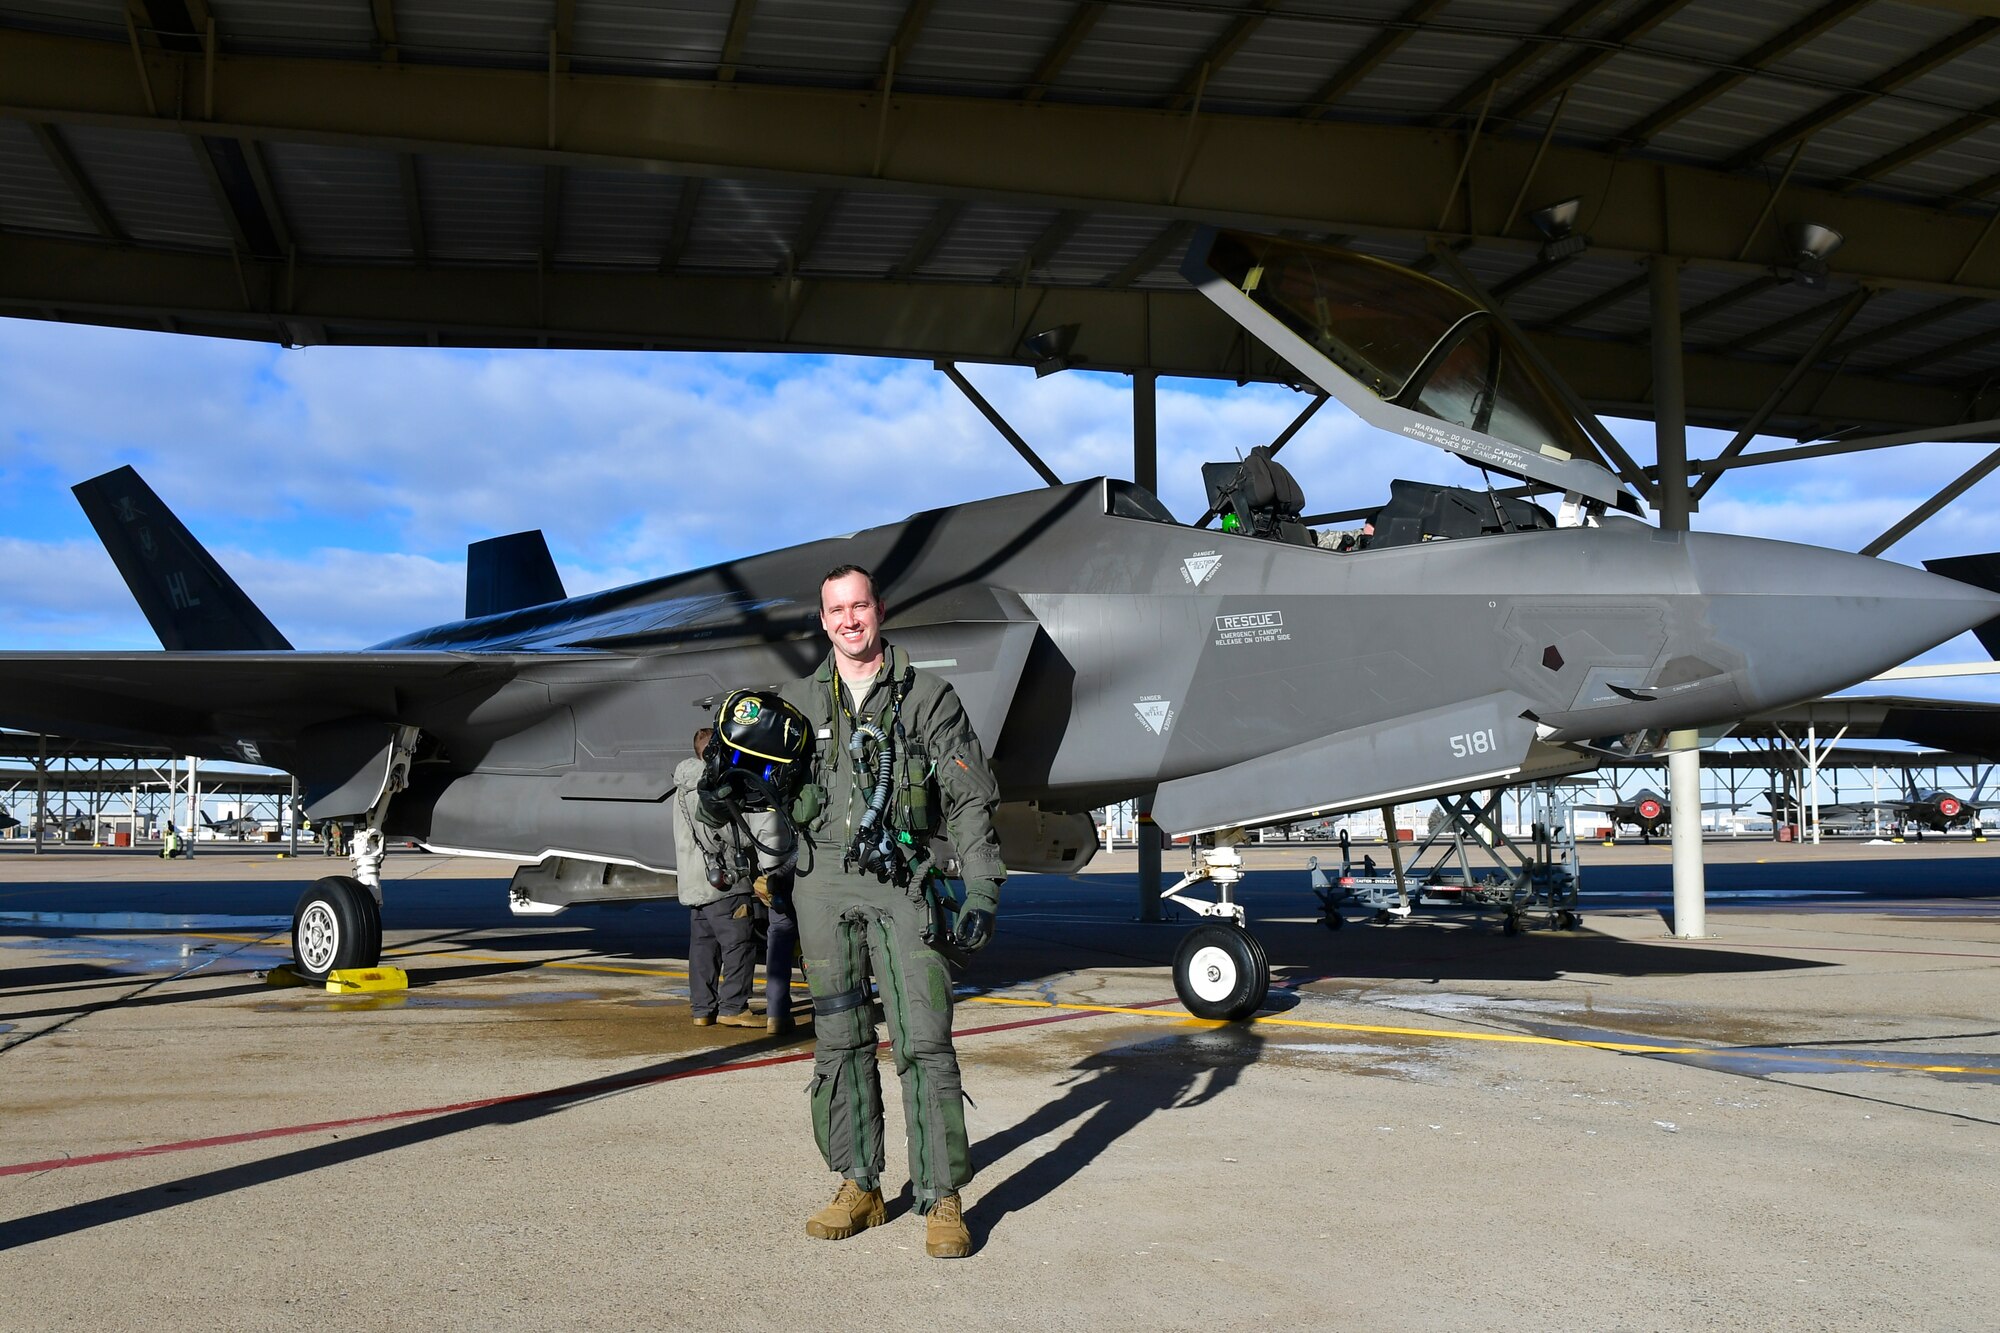 Maj. Daniel Toftness, an Air Force Reserve pilot in the 419th Fighter Wing at Hill Air Force Base, Utah, poses for a photo before for a flight Feb. 18 when he will reach 1,000 flying hours in the F-3A5 Lightning II.